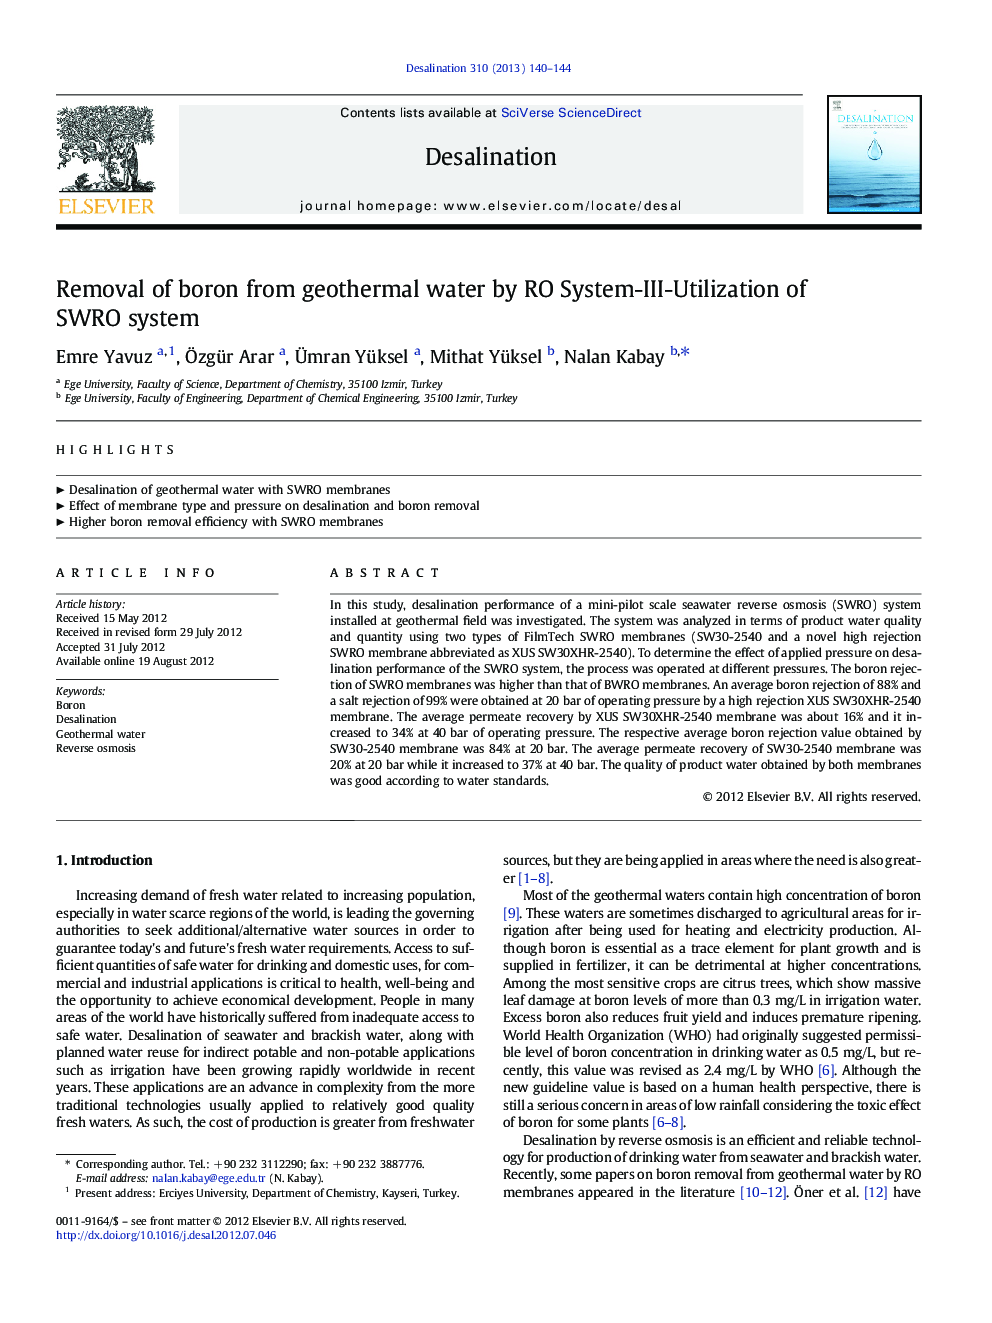 Removal of boron from geothermal water by RO System-III-Utilization of SWRO system